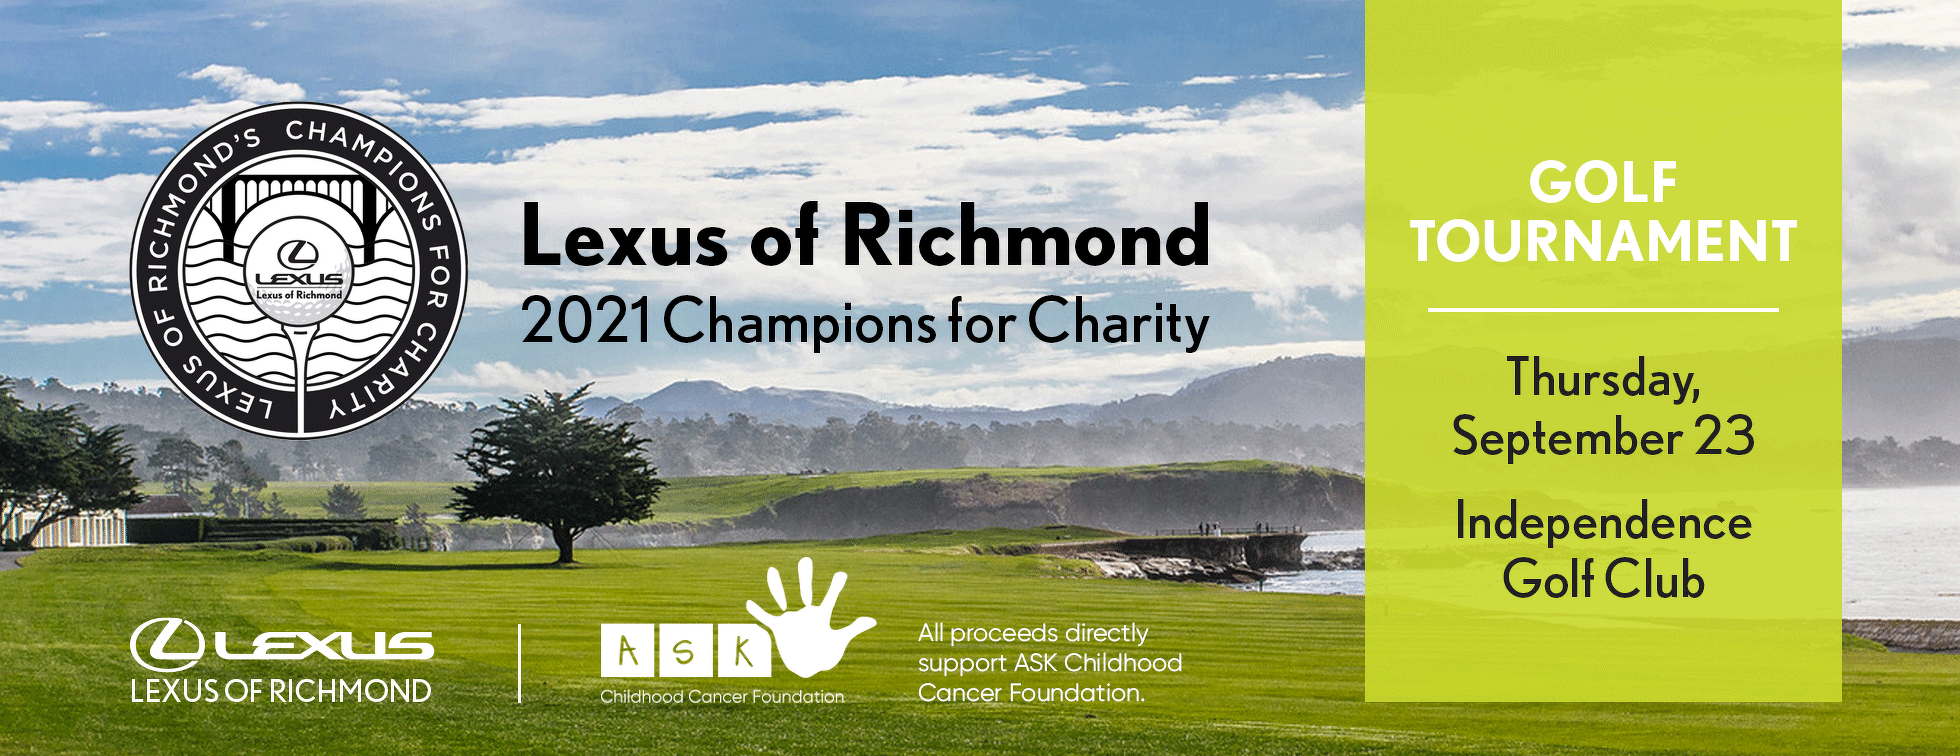 Lexus of Richmond Champions for Charity 2021